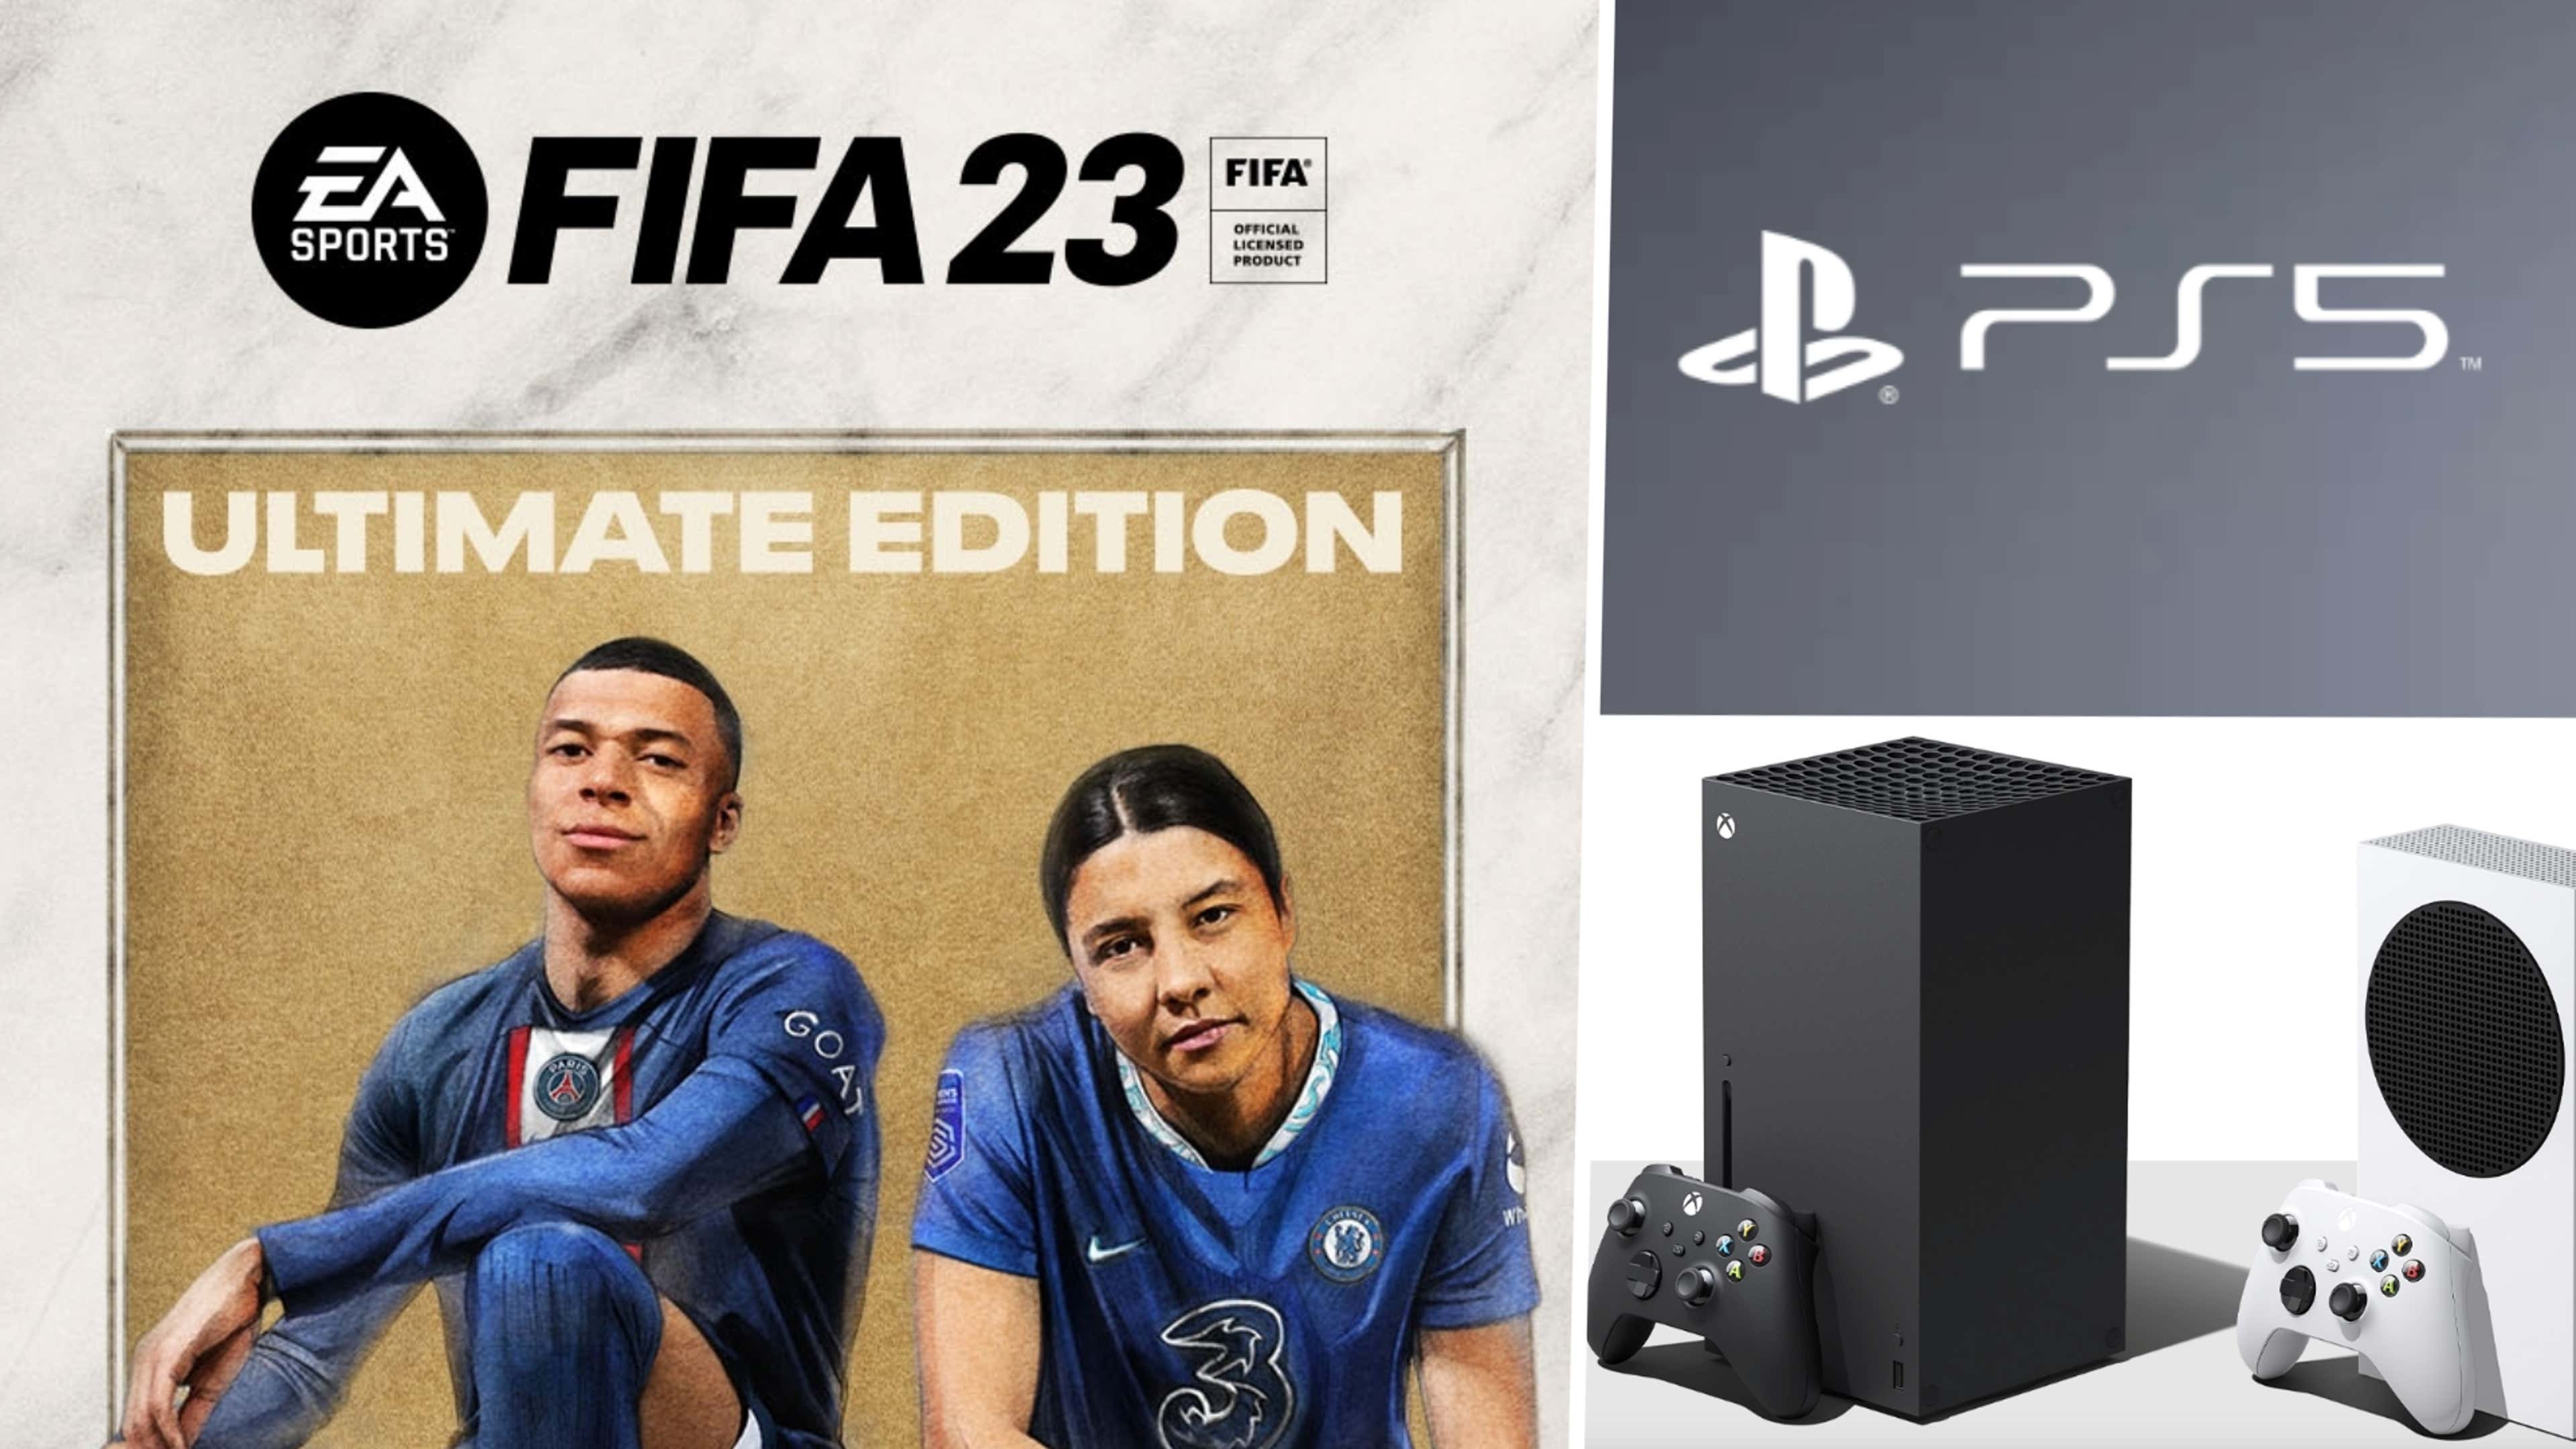 HOW TO INVITE CROSSPLAY/CROSS PLATFORM IN FIFA 23 XBOX/PS4/PS5/PC